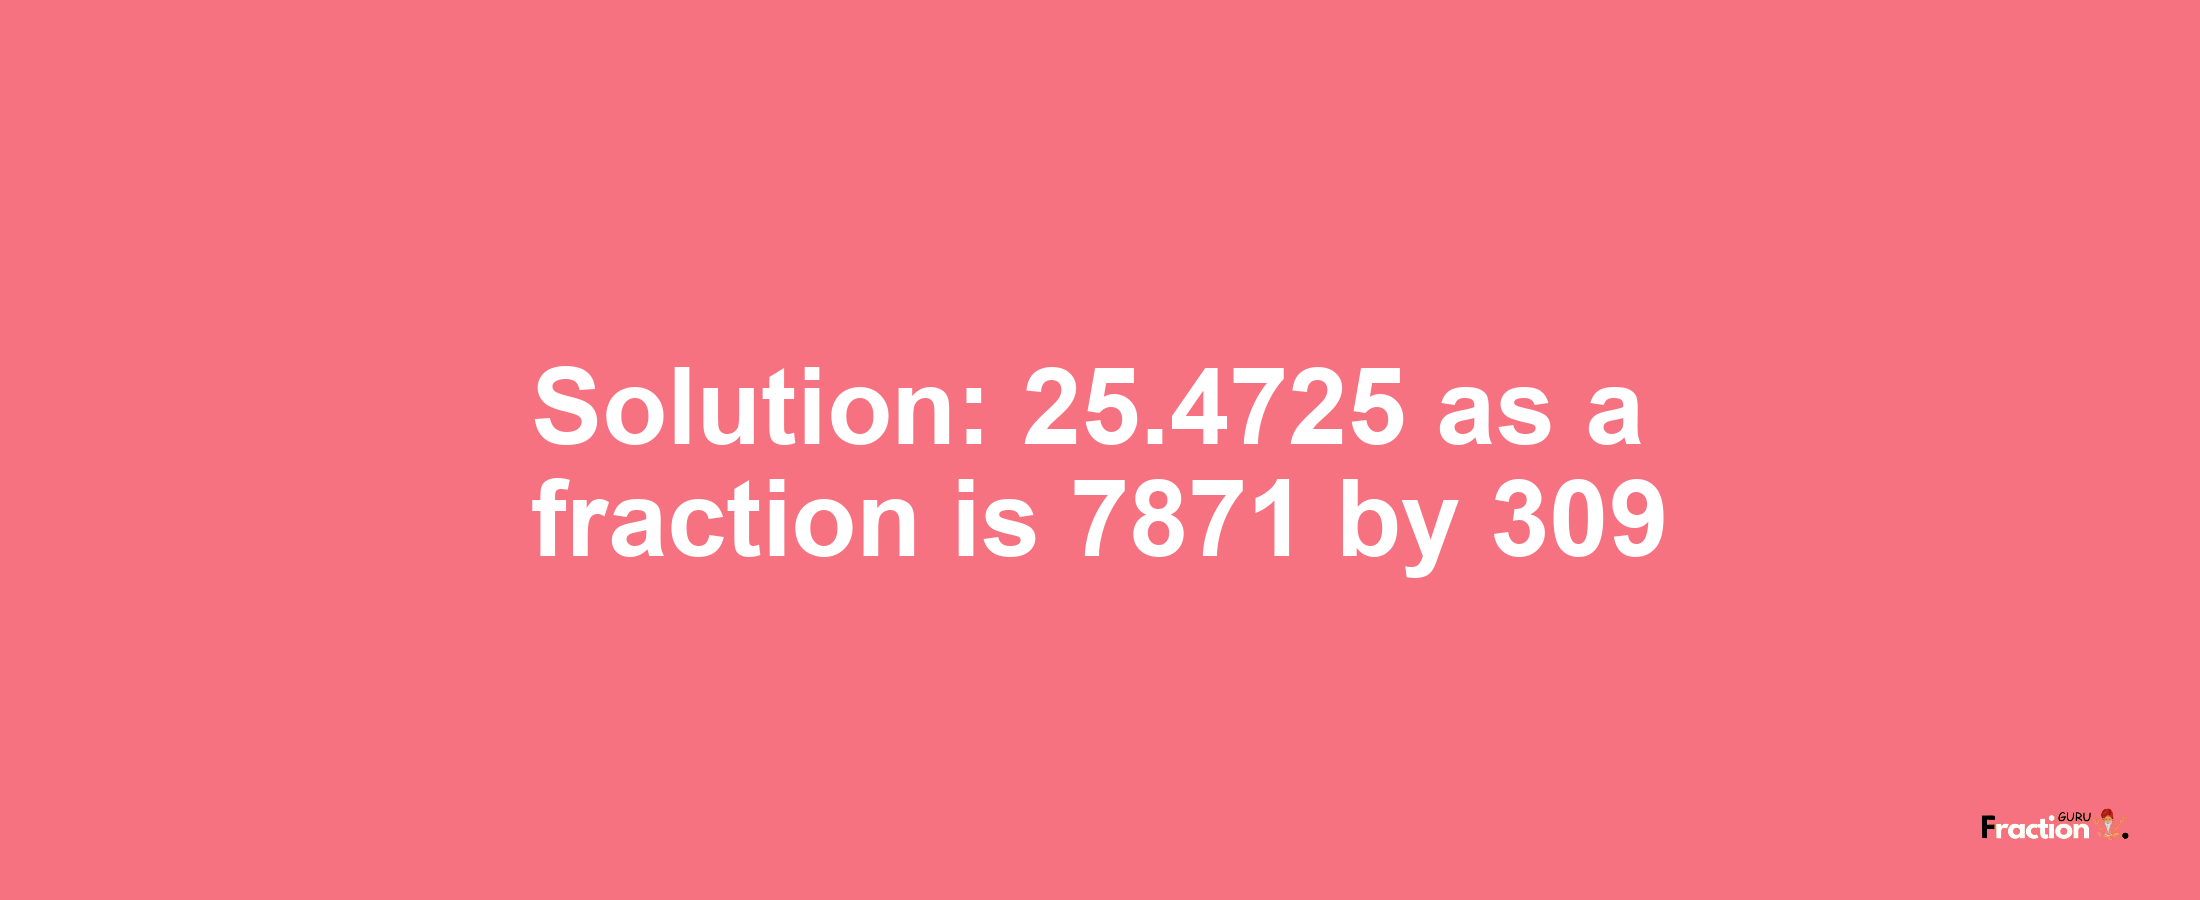 Solution:25.4725 as a fraction is 7871/309